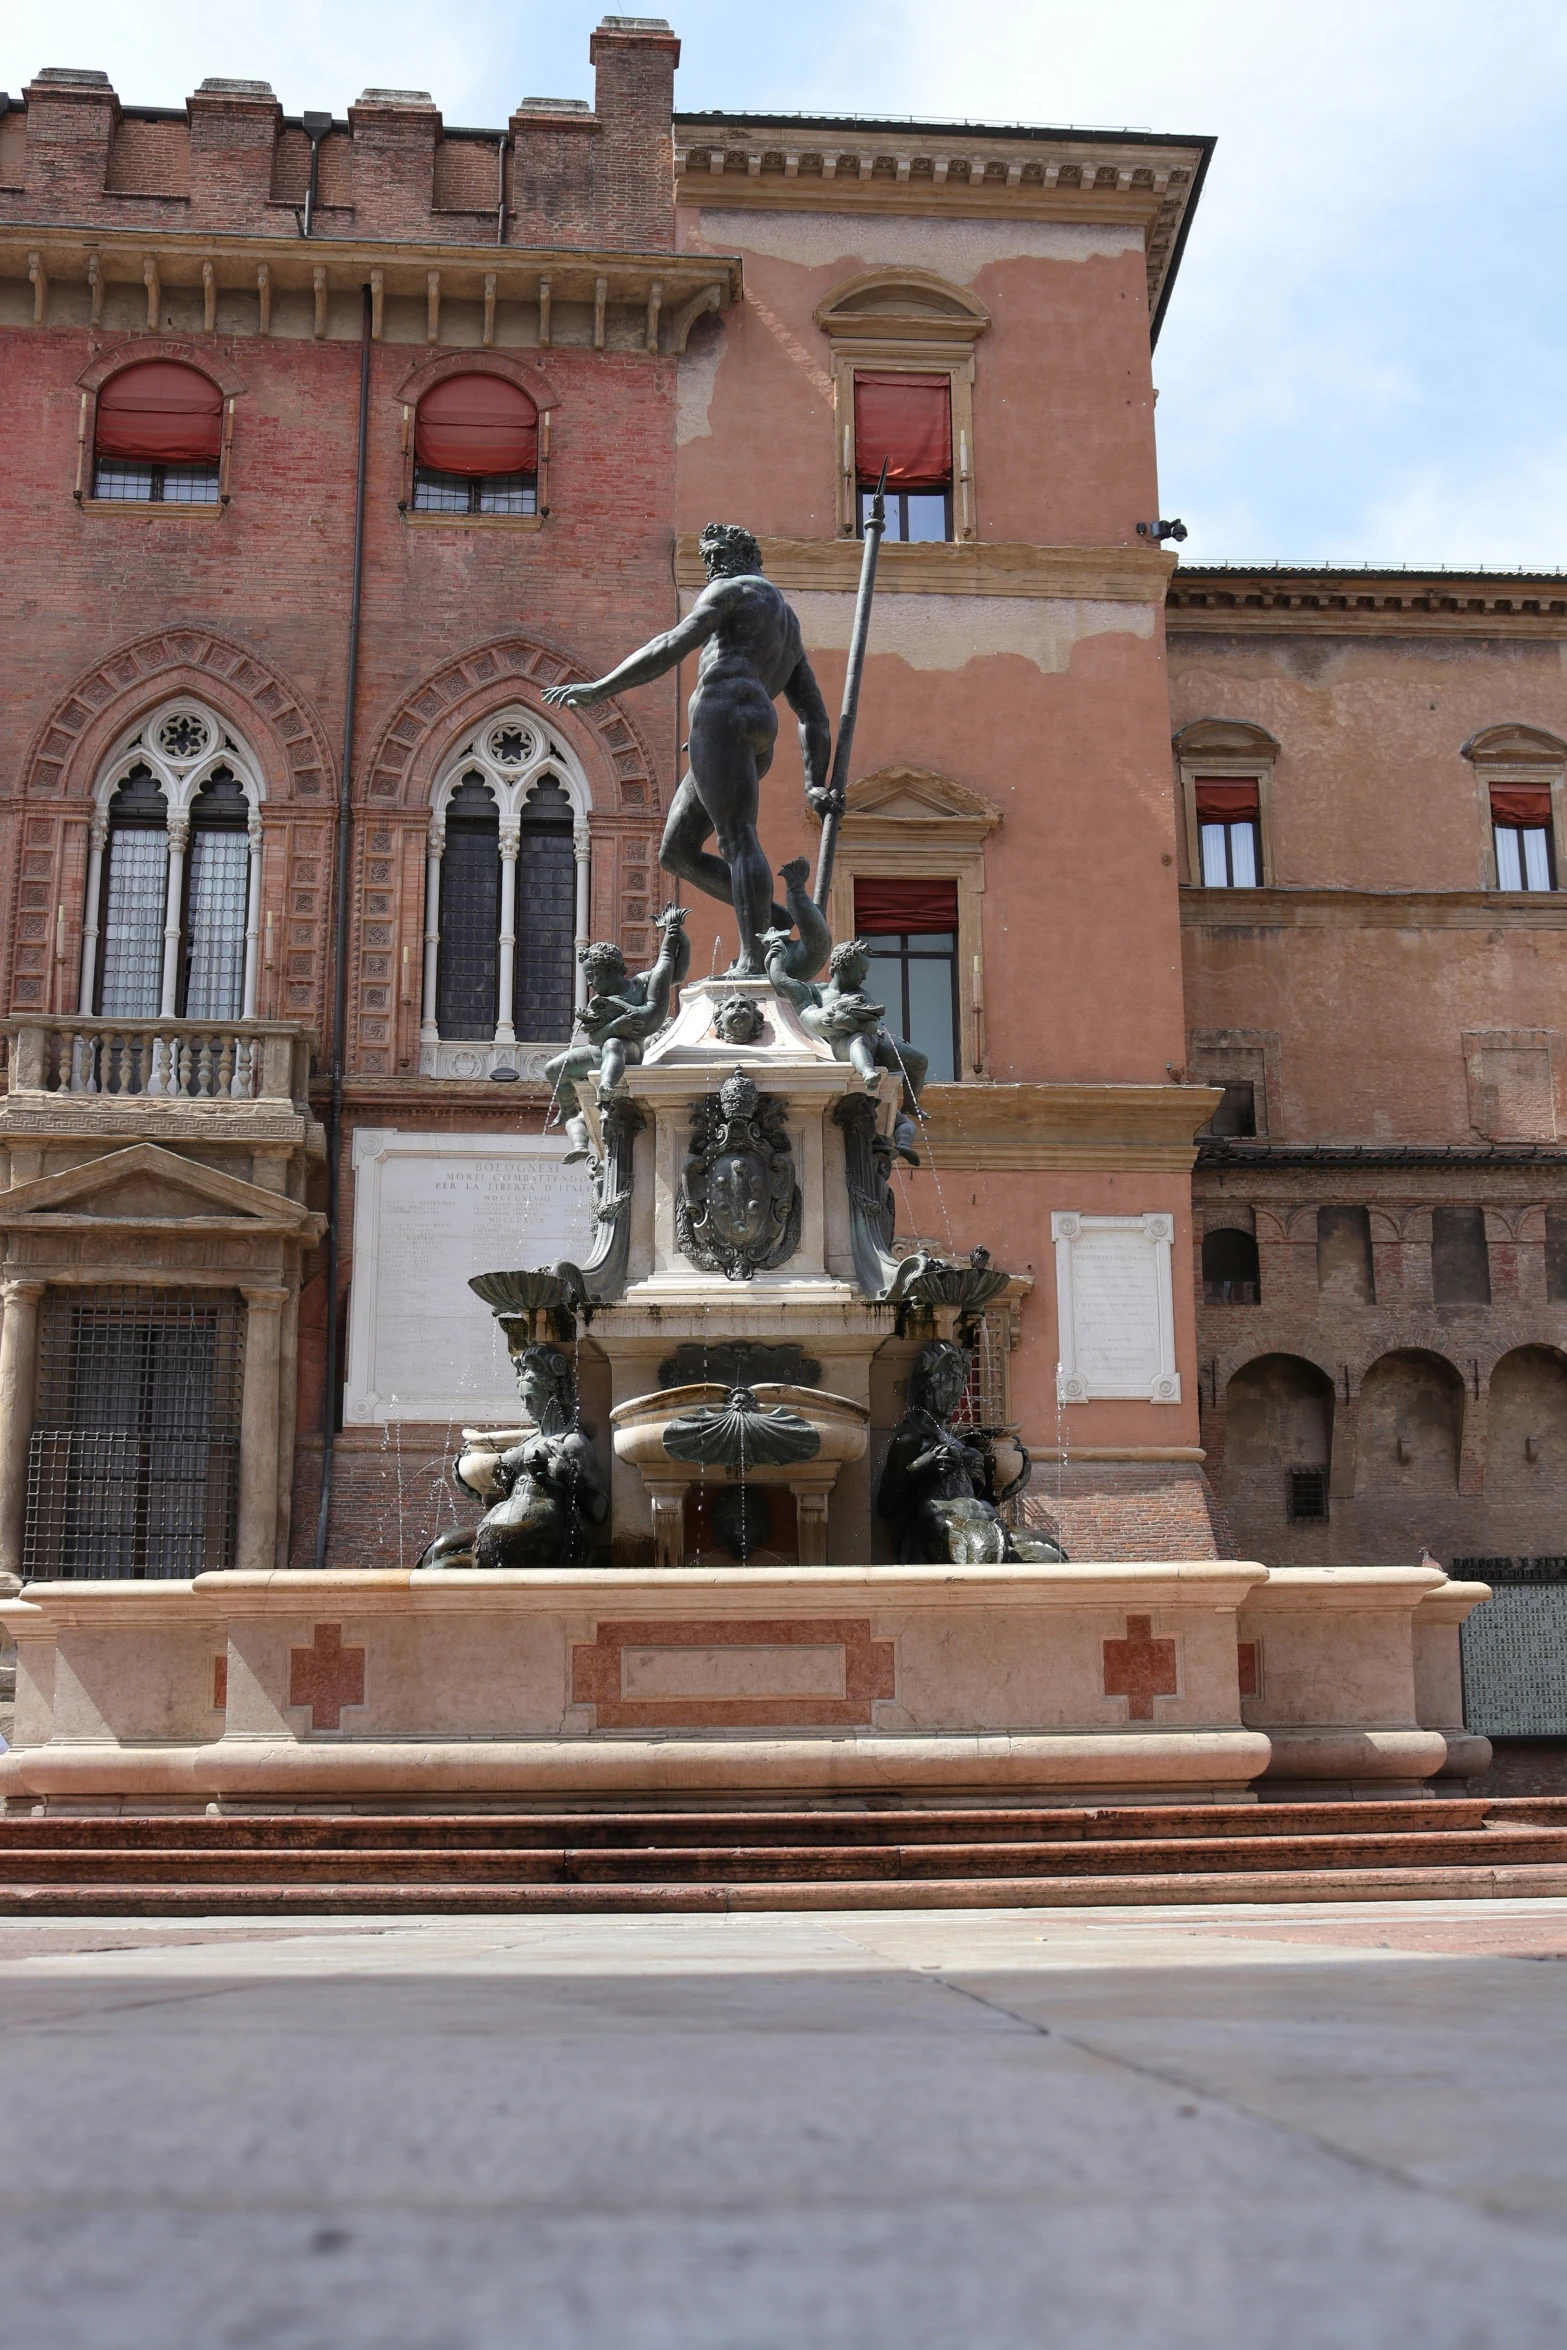 a large red building with a statue of a man in the center